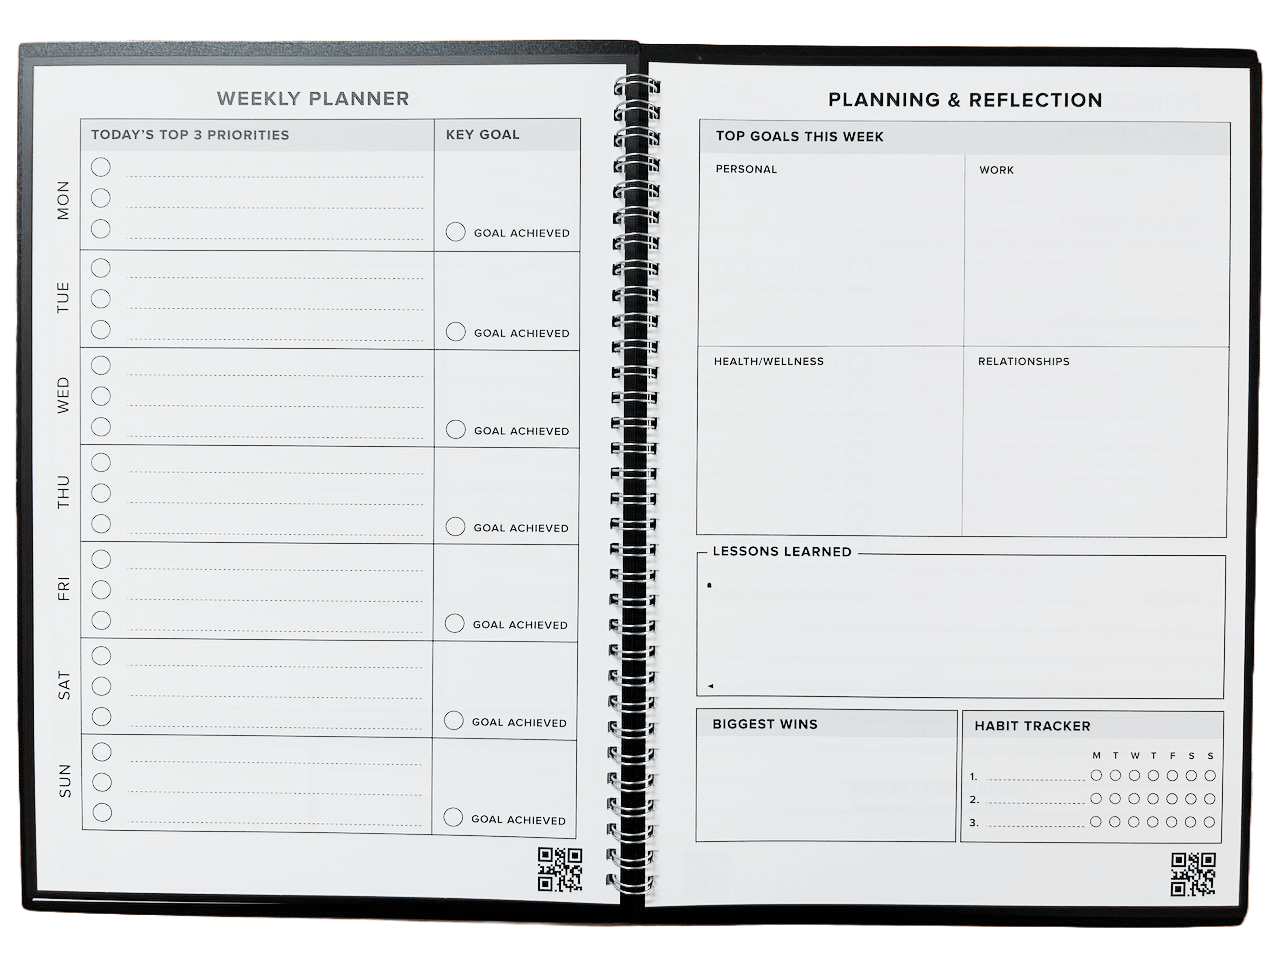 Fusion Reusable Planner Ruled and Unruled Smart Notebook (A4,50 Page / 50 Side / 25 sheets)